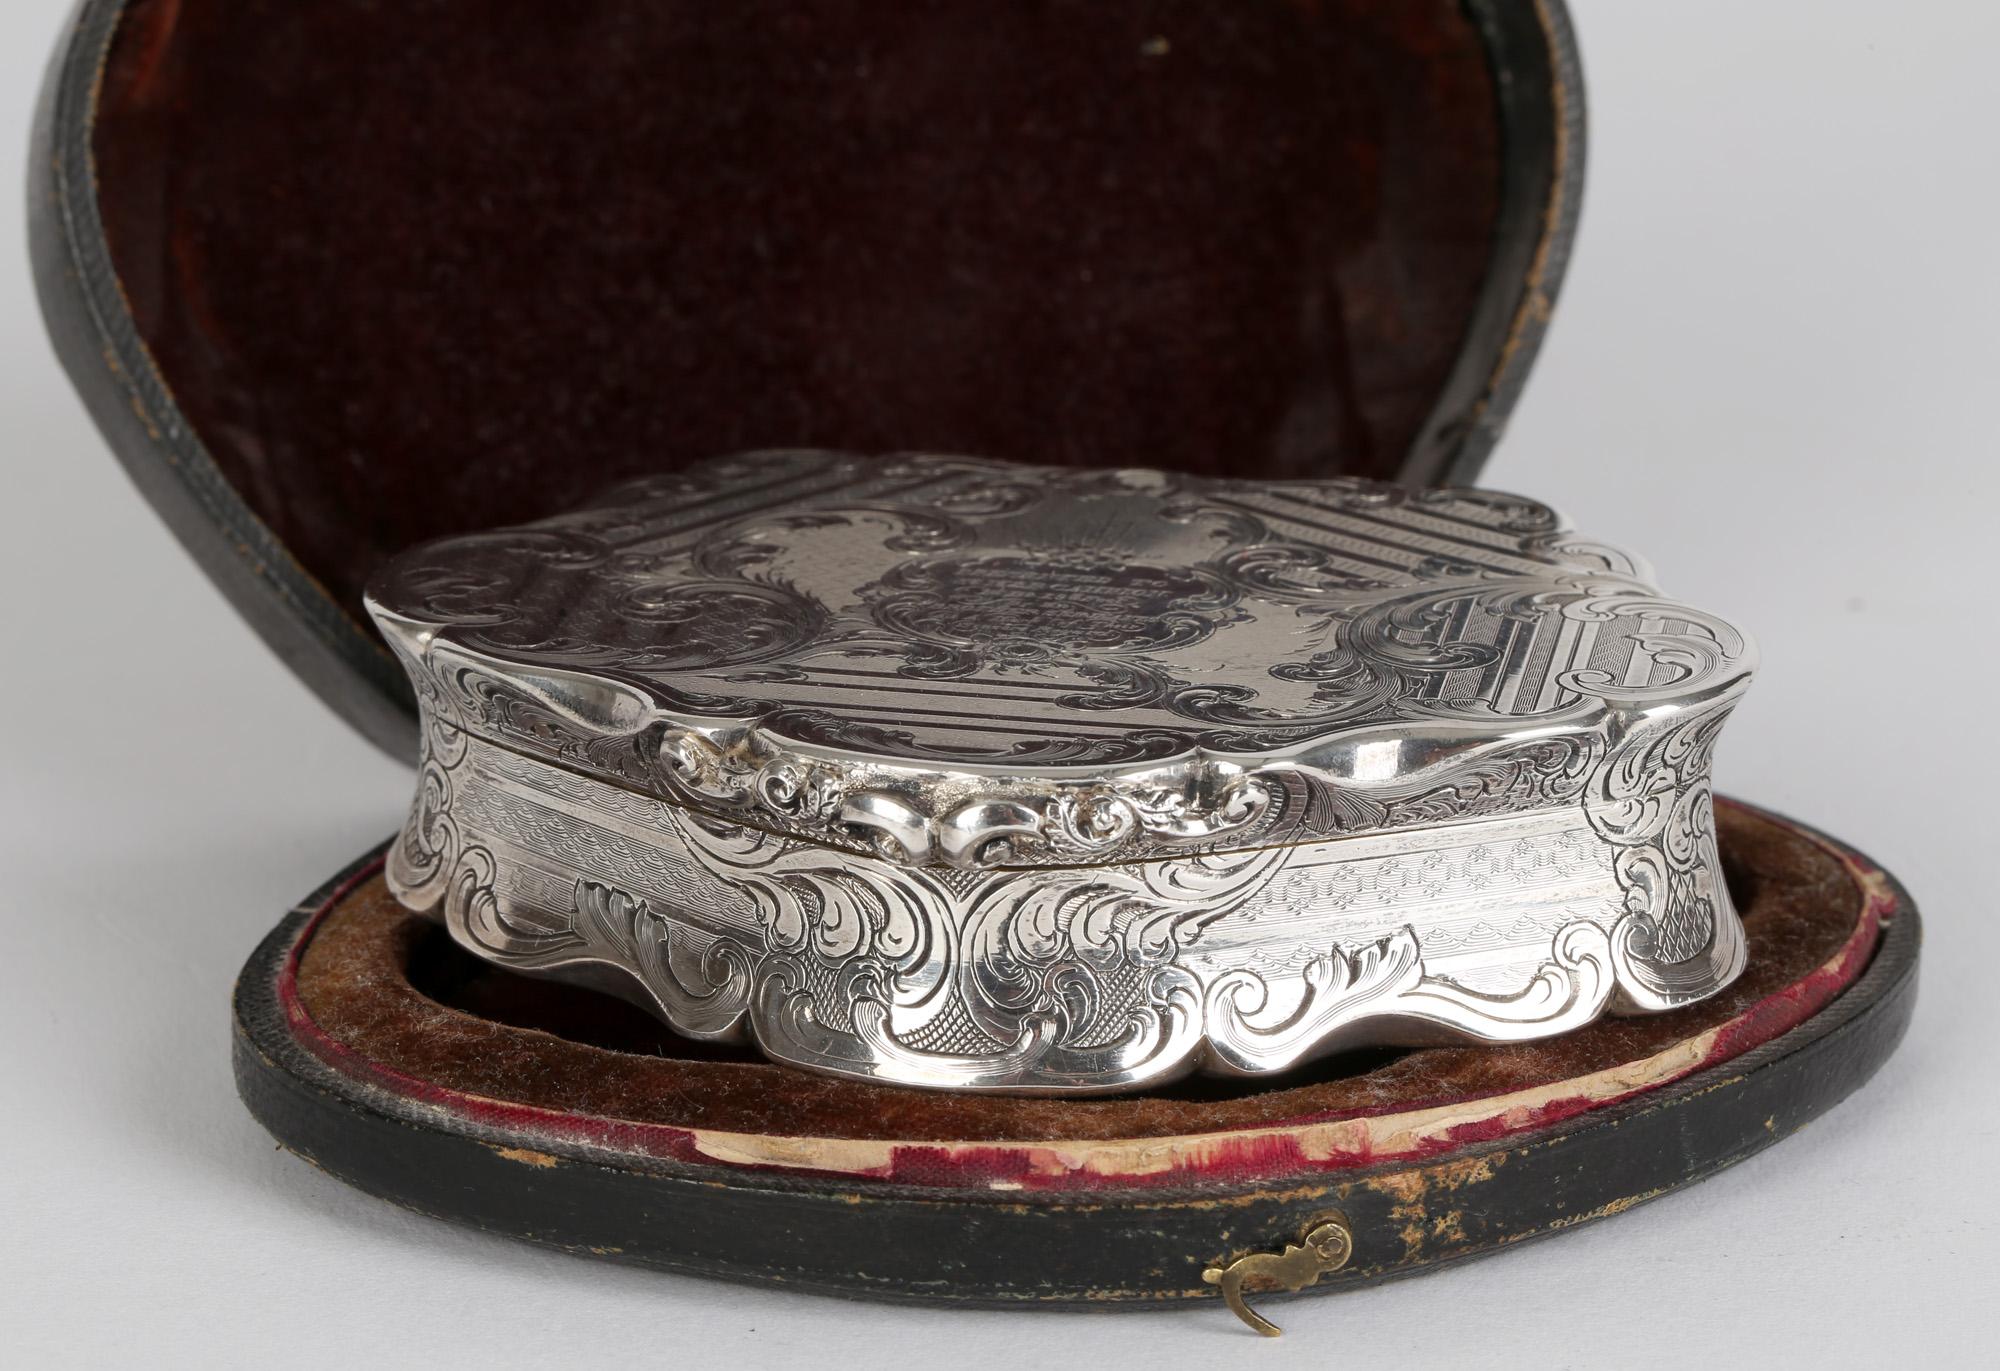 An exceptional and rare antique silver snuffbox reading 'PRESENTED TO St. Mr. P CAMPION, 1st Bn 19th Foot, by His, BROTHER SERJEANTS, As A Mark of Their, Sincere Regard.' in its original shaped fitted case and made by Cronin & Wheeler, Birmingham in